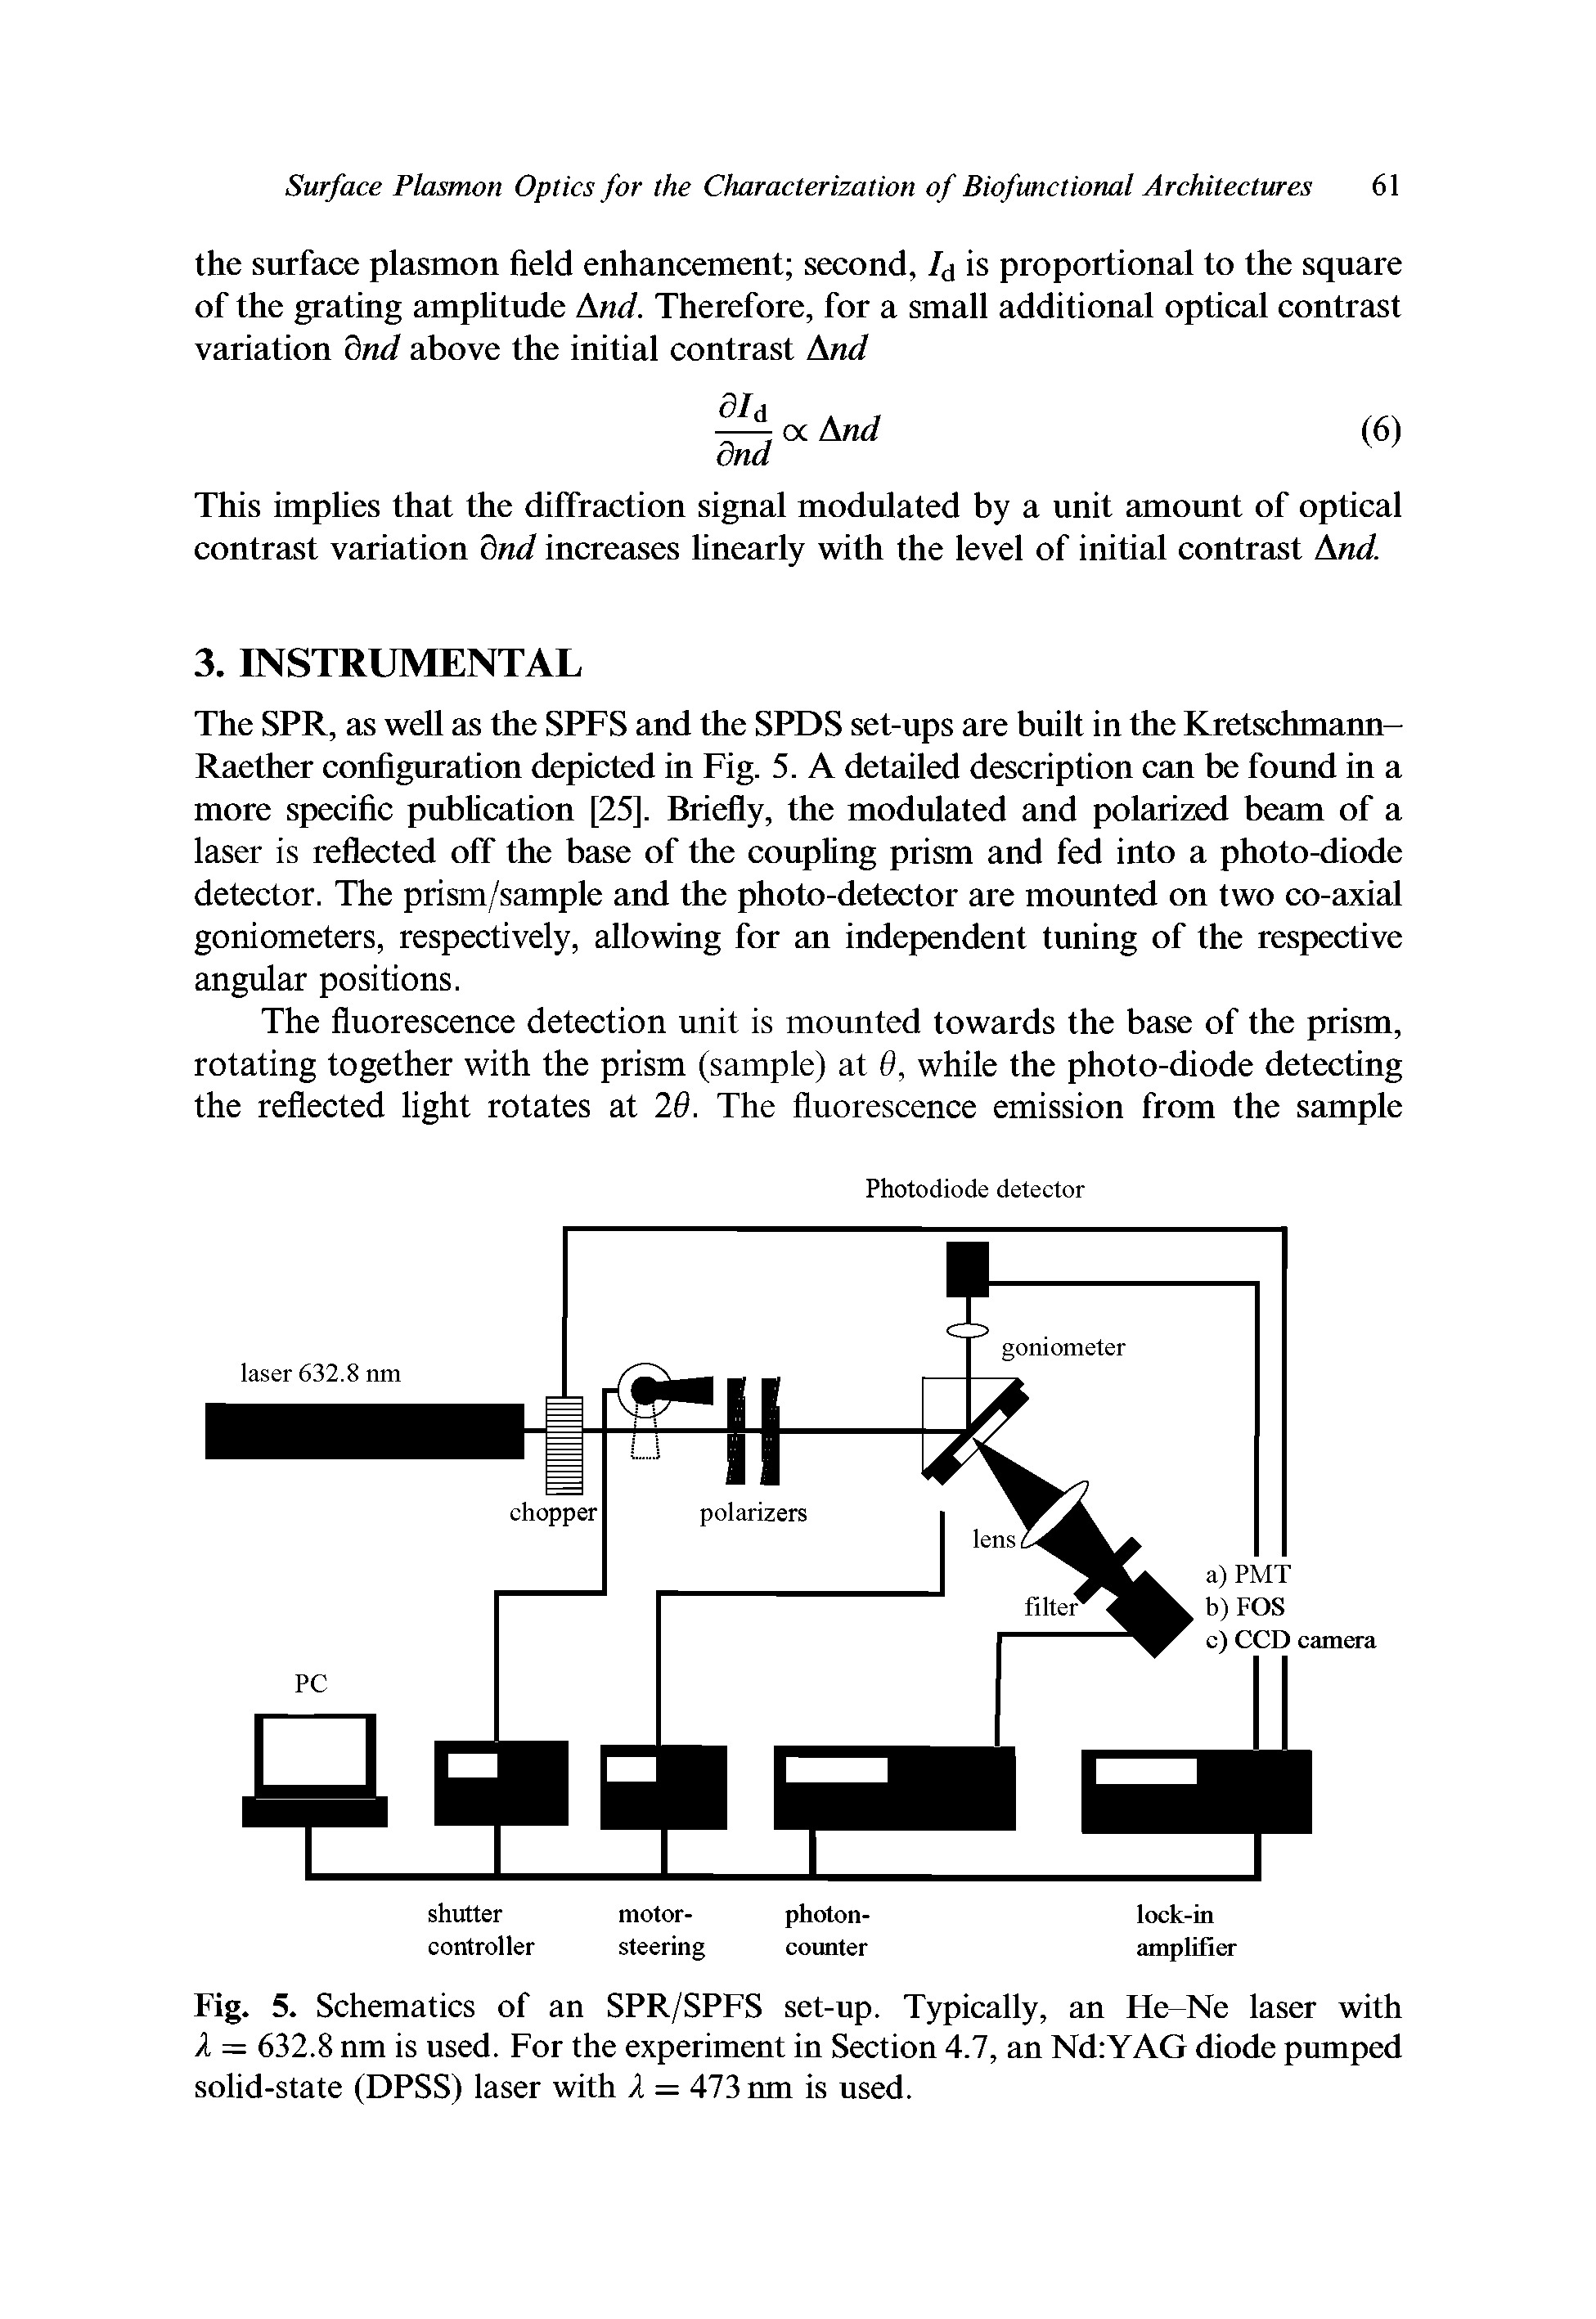 Fig. 5. Schematics of an SPR/SPFS set-up. Typically, an He Ne laser with l — 632.8 nm is used. For the experiment in Section 4.7, an Nd YAG diode pumped solid-state (DPSS) laser with X — 473 nm is used.